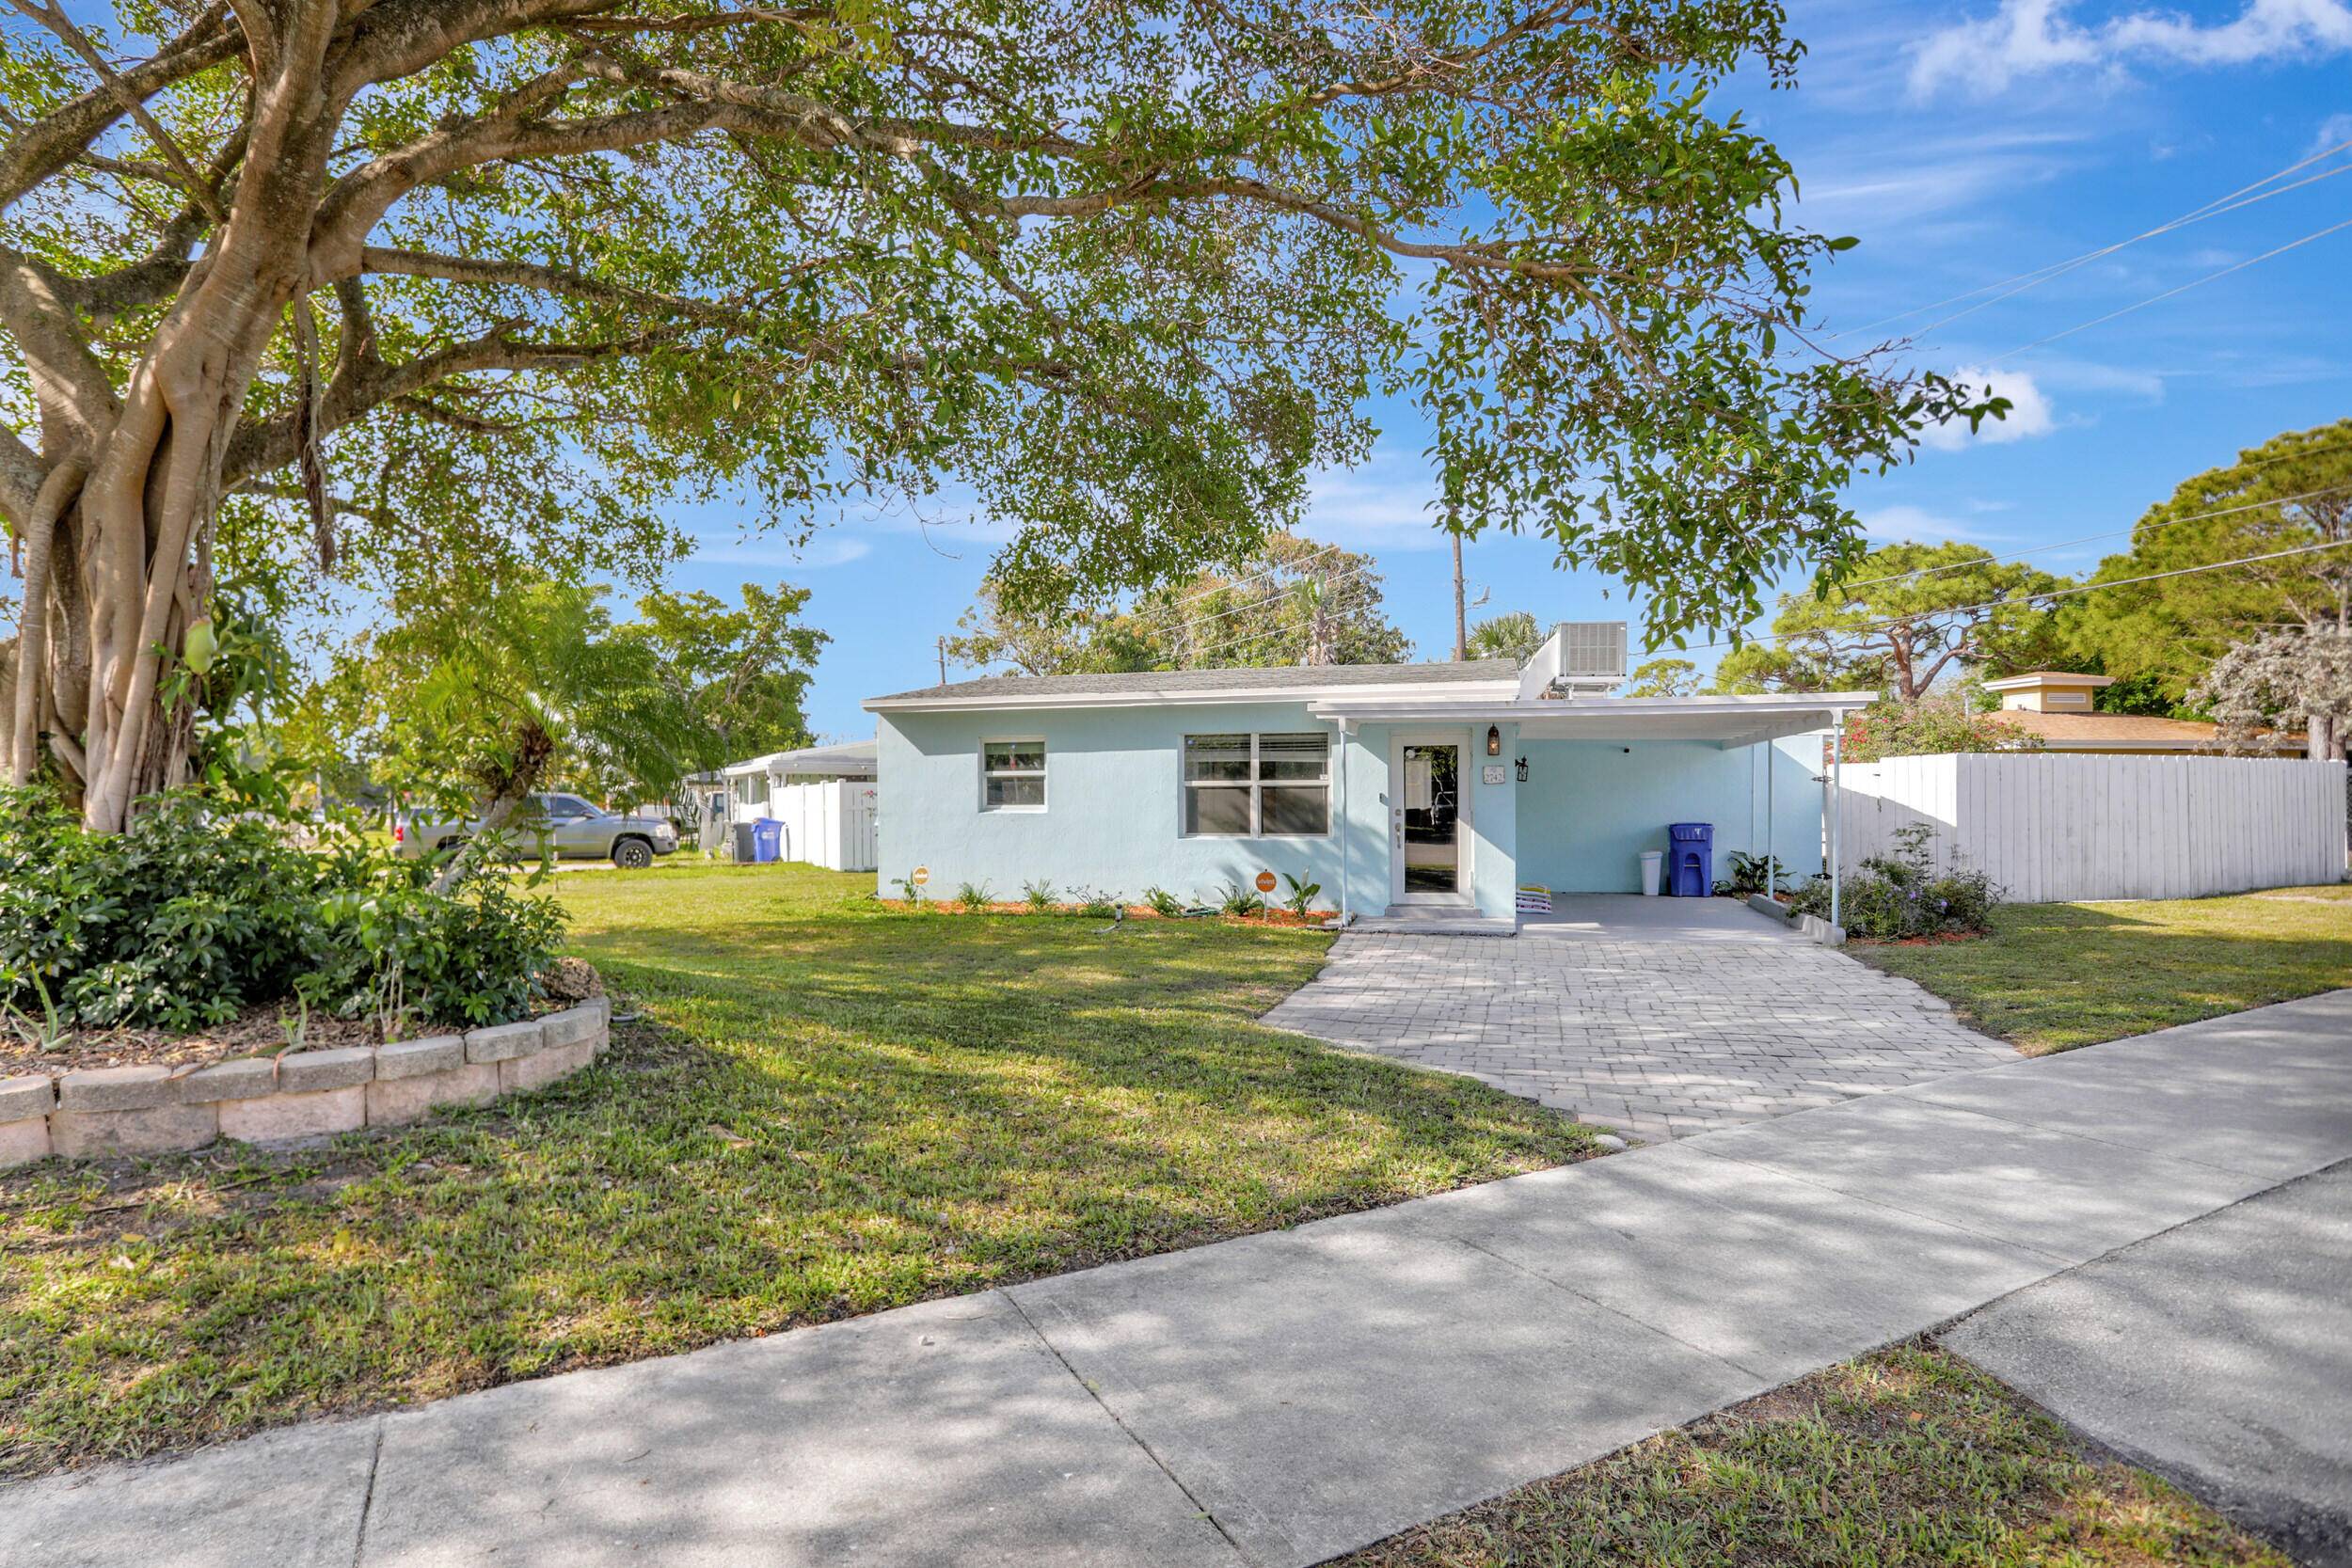 Welcome to this quaint 2 Bedroom 1 Bathroom home plus family room nestled in the Cresthaven neighborhood of Pompano Beach.